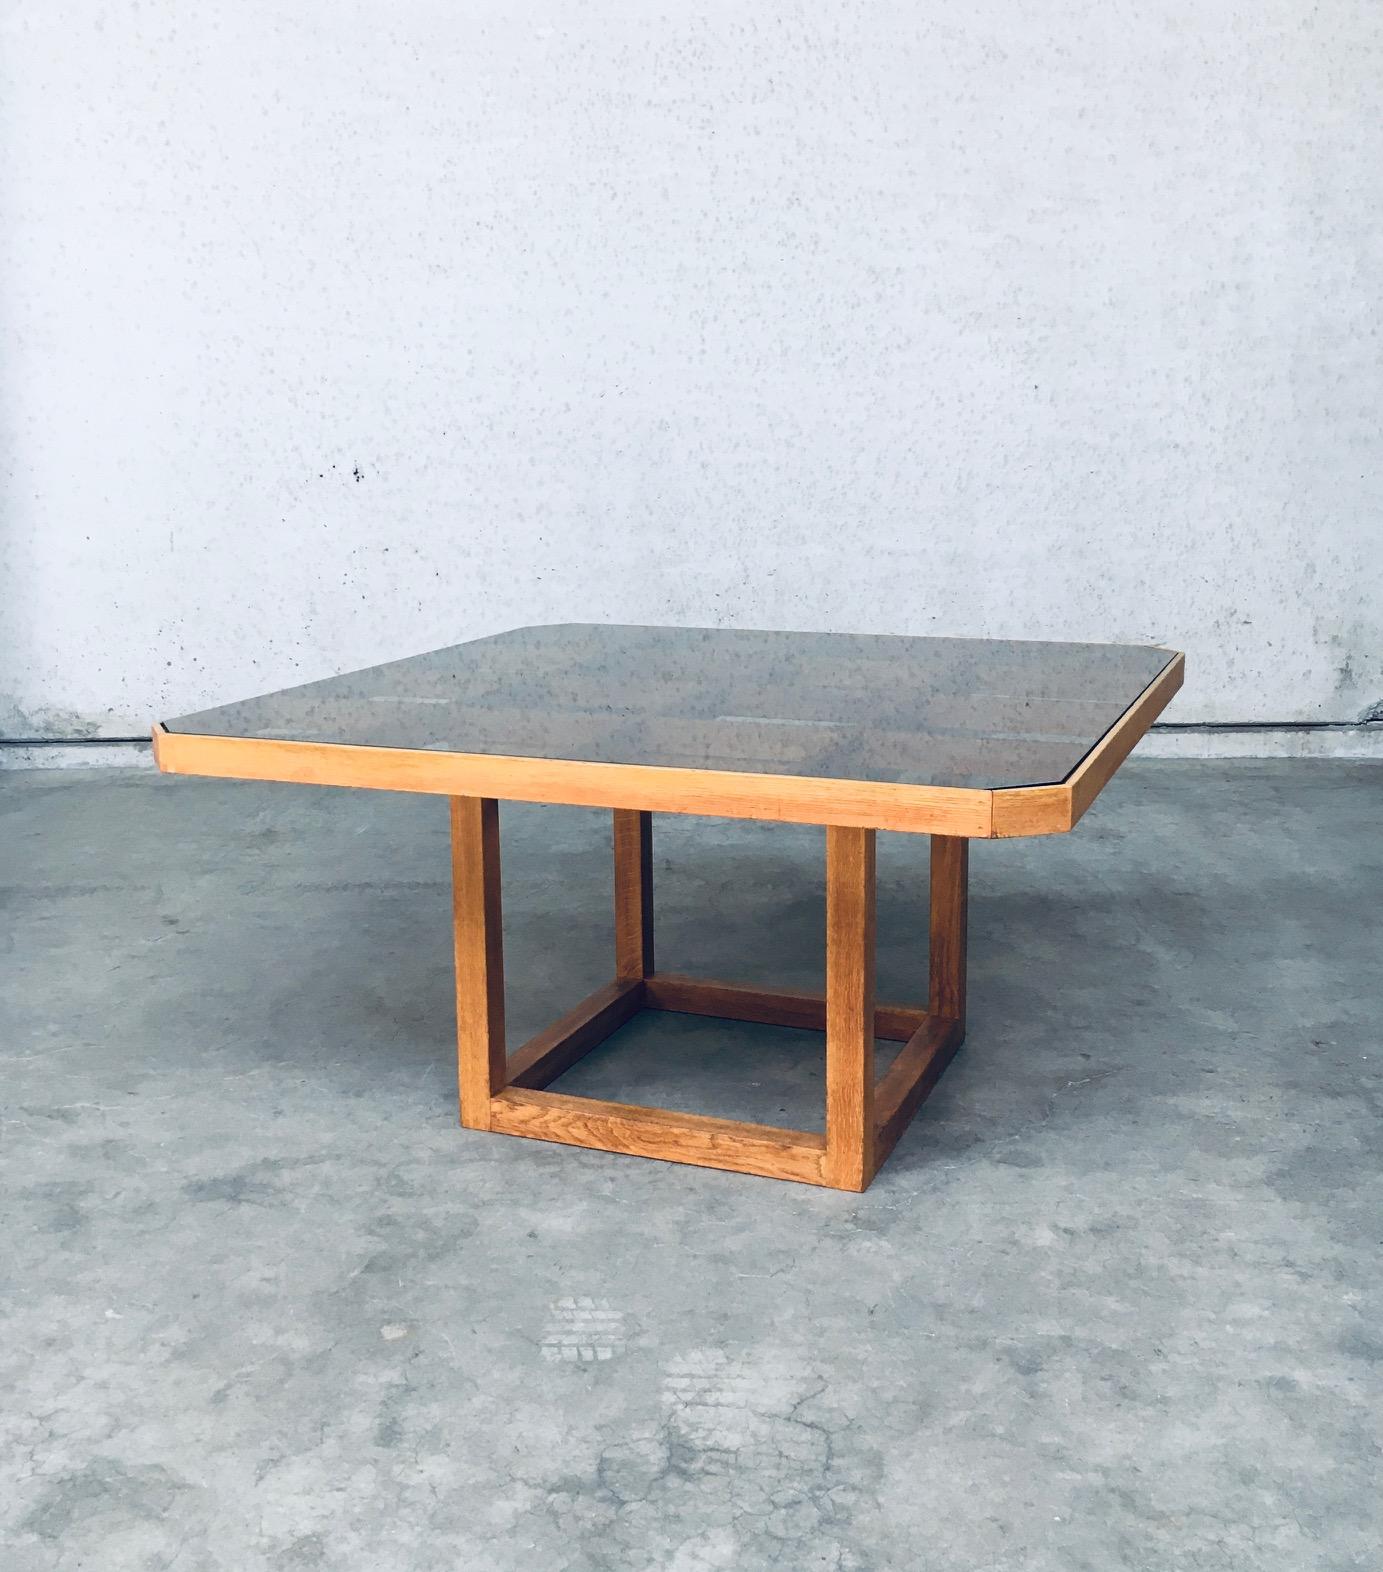 Vintage Postmodern Design Octagonal Square large dining table. Made in the 1980s. Probably Belgium. No maker markings or info found. Light oak constructed open frame with smoke grey glass inlay top. Impressive design and Size. Can easily seat 8.